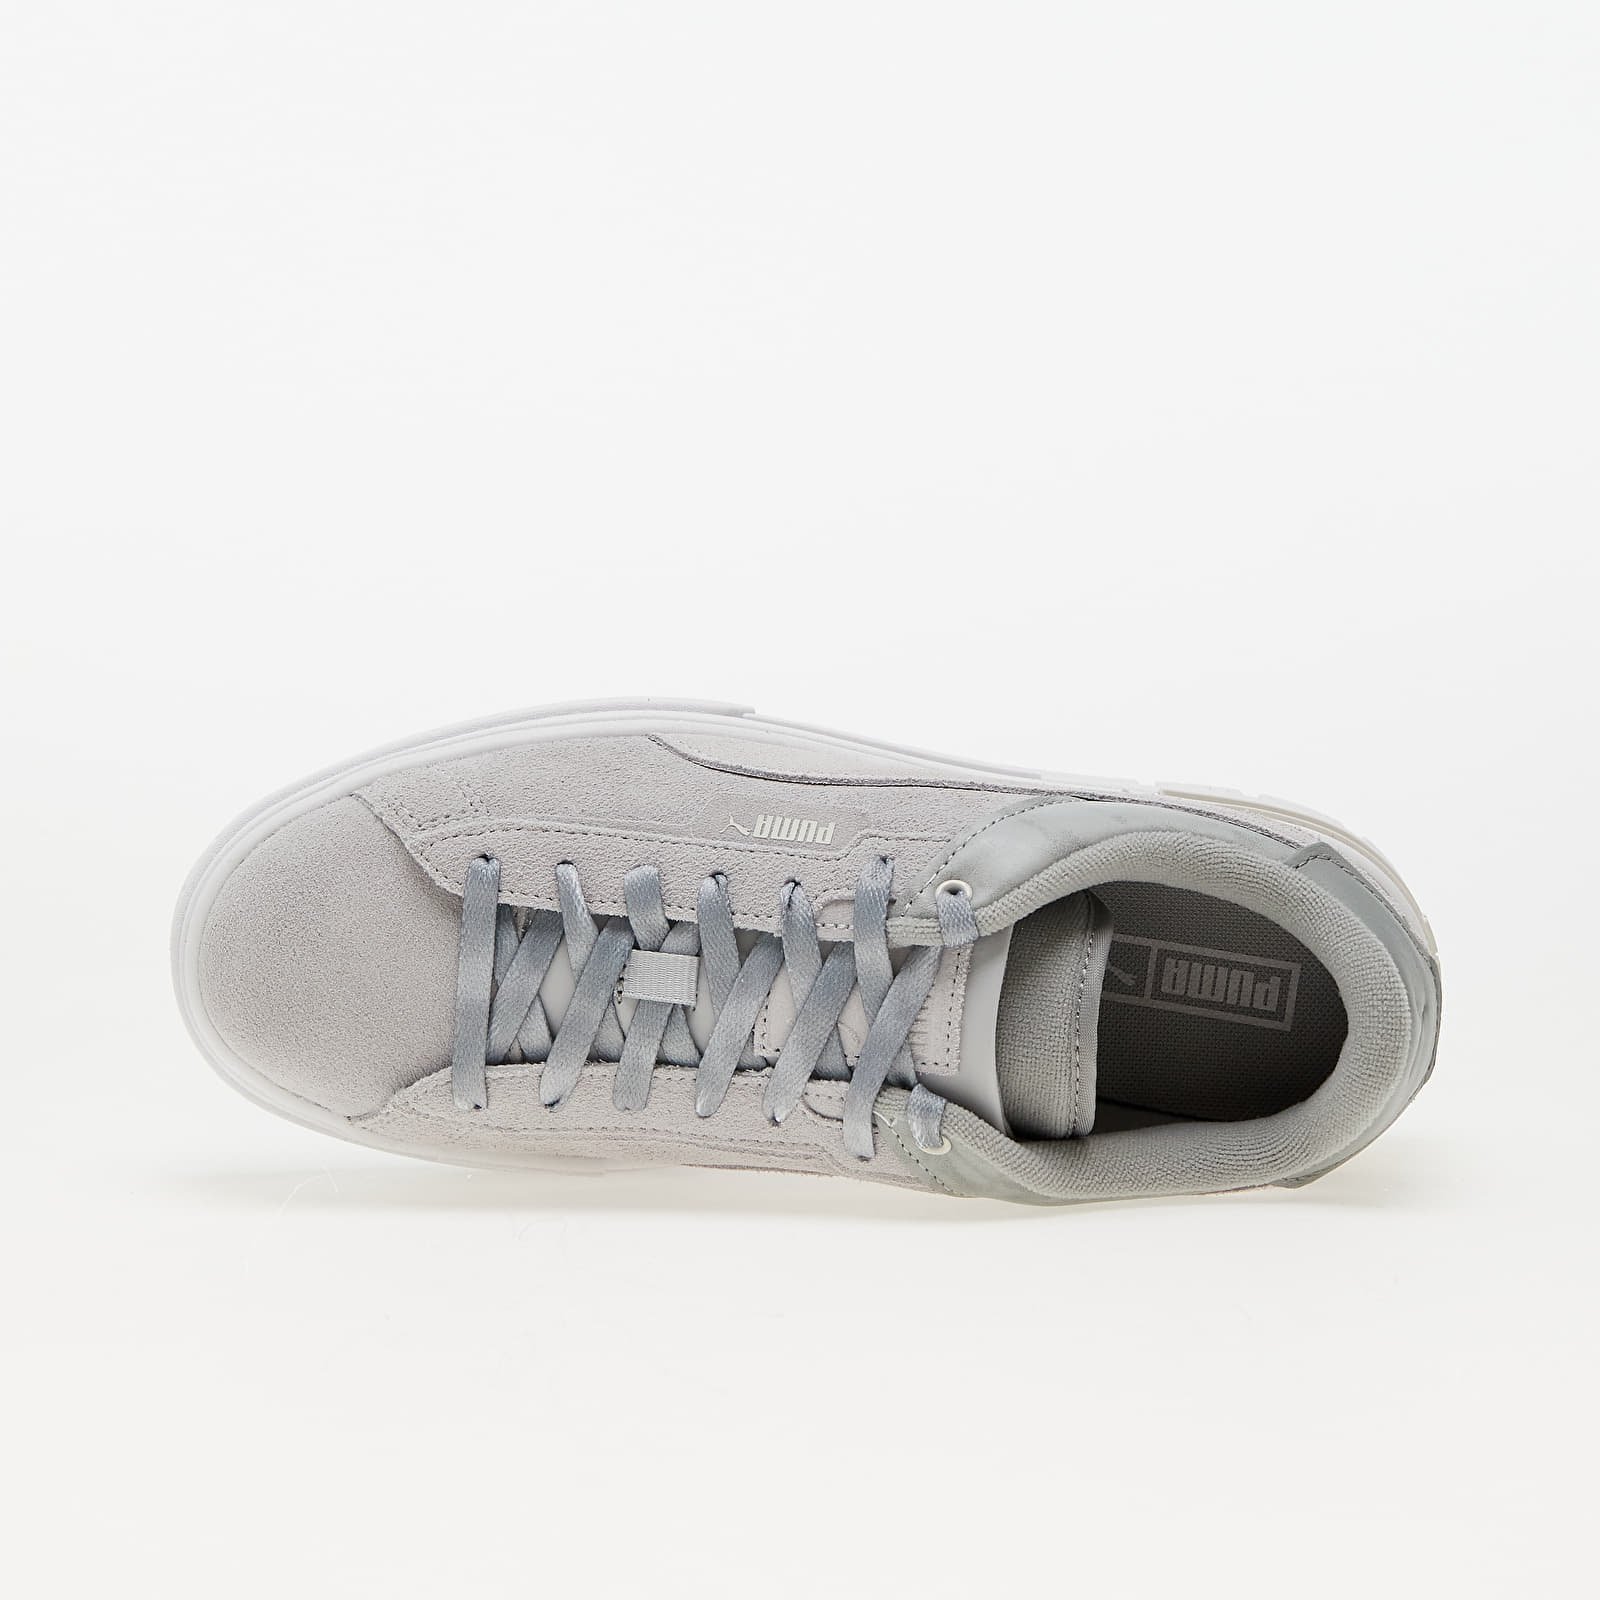 Mayze Crashed Retreat Yourself Wns Gray, Women's low-top sneakers